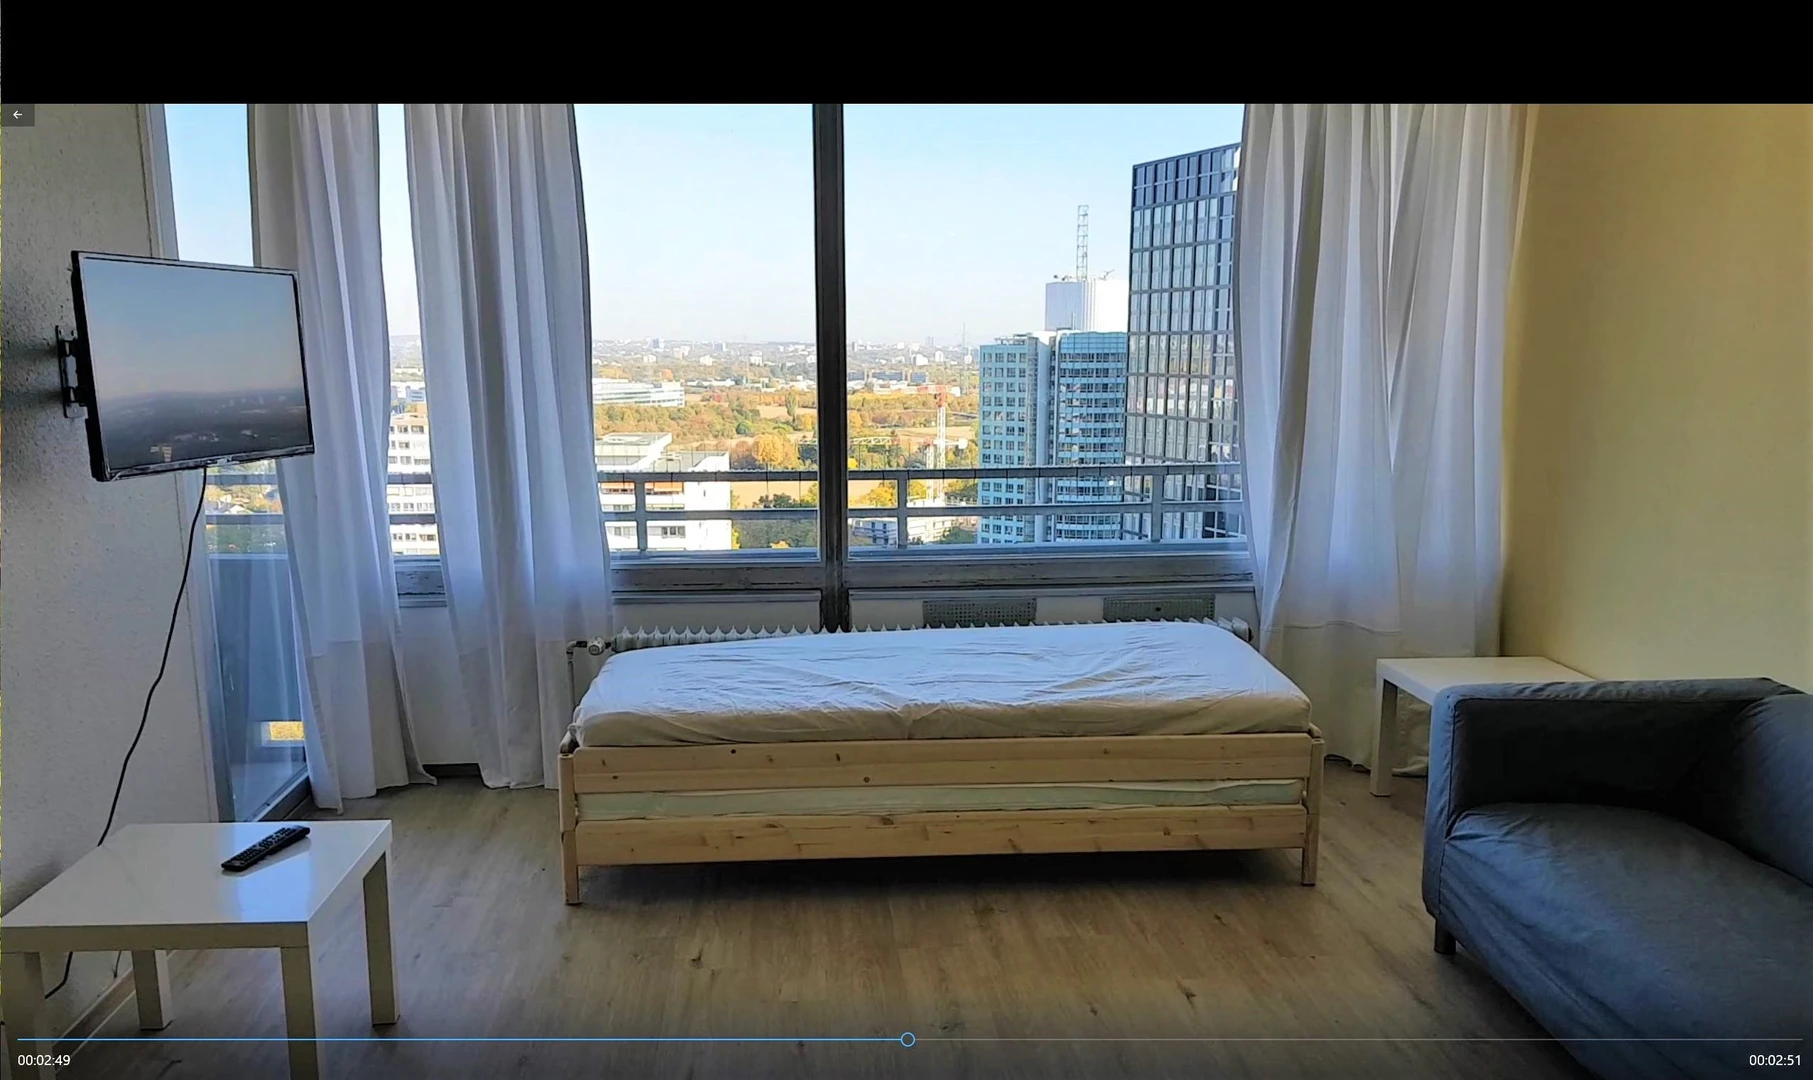 Room for rent with double bed Eschborn